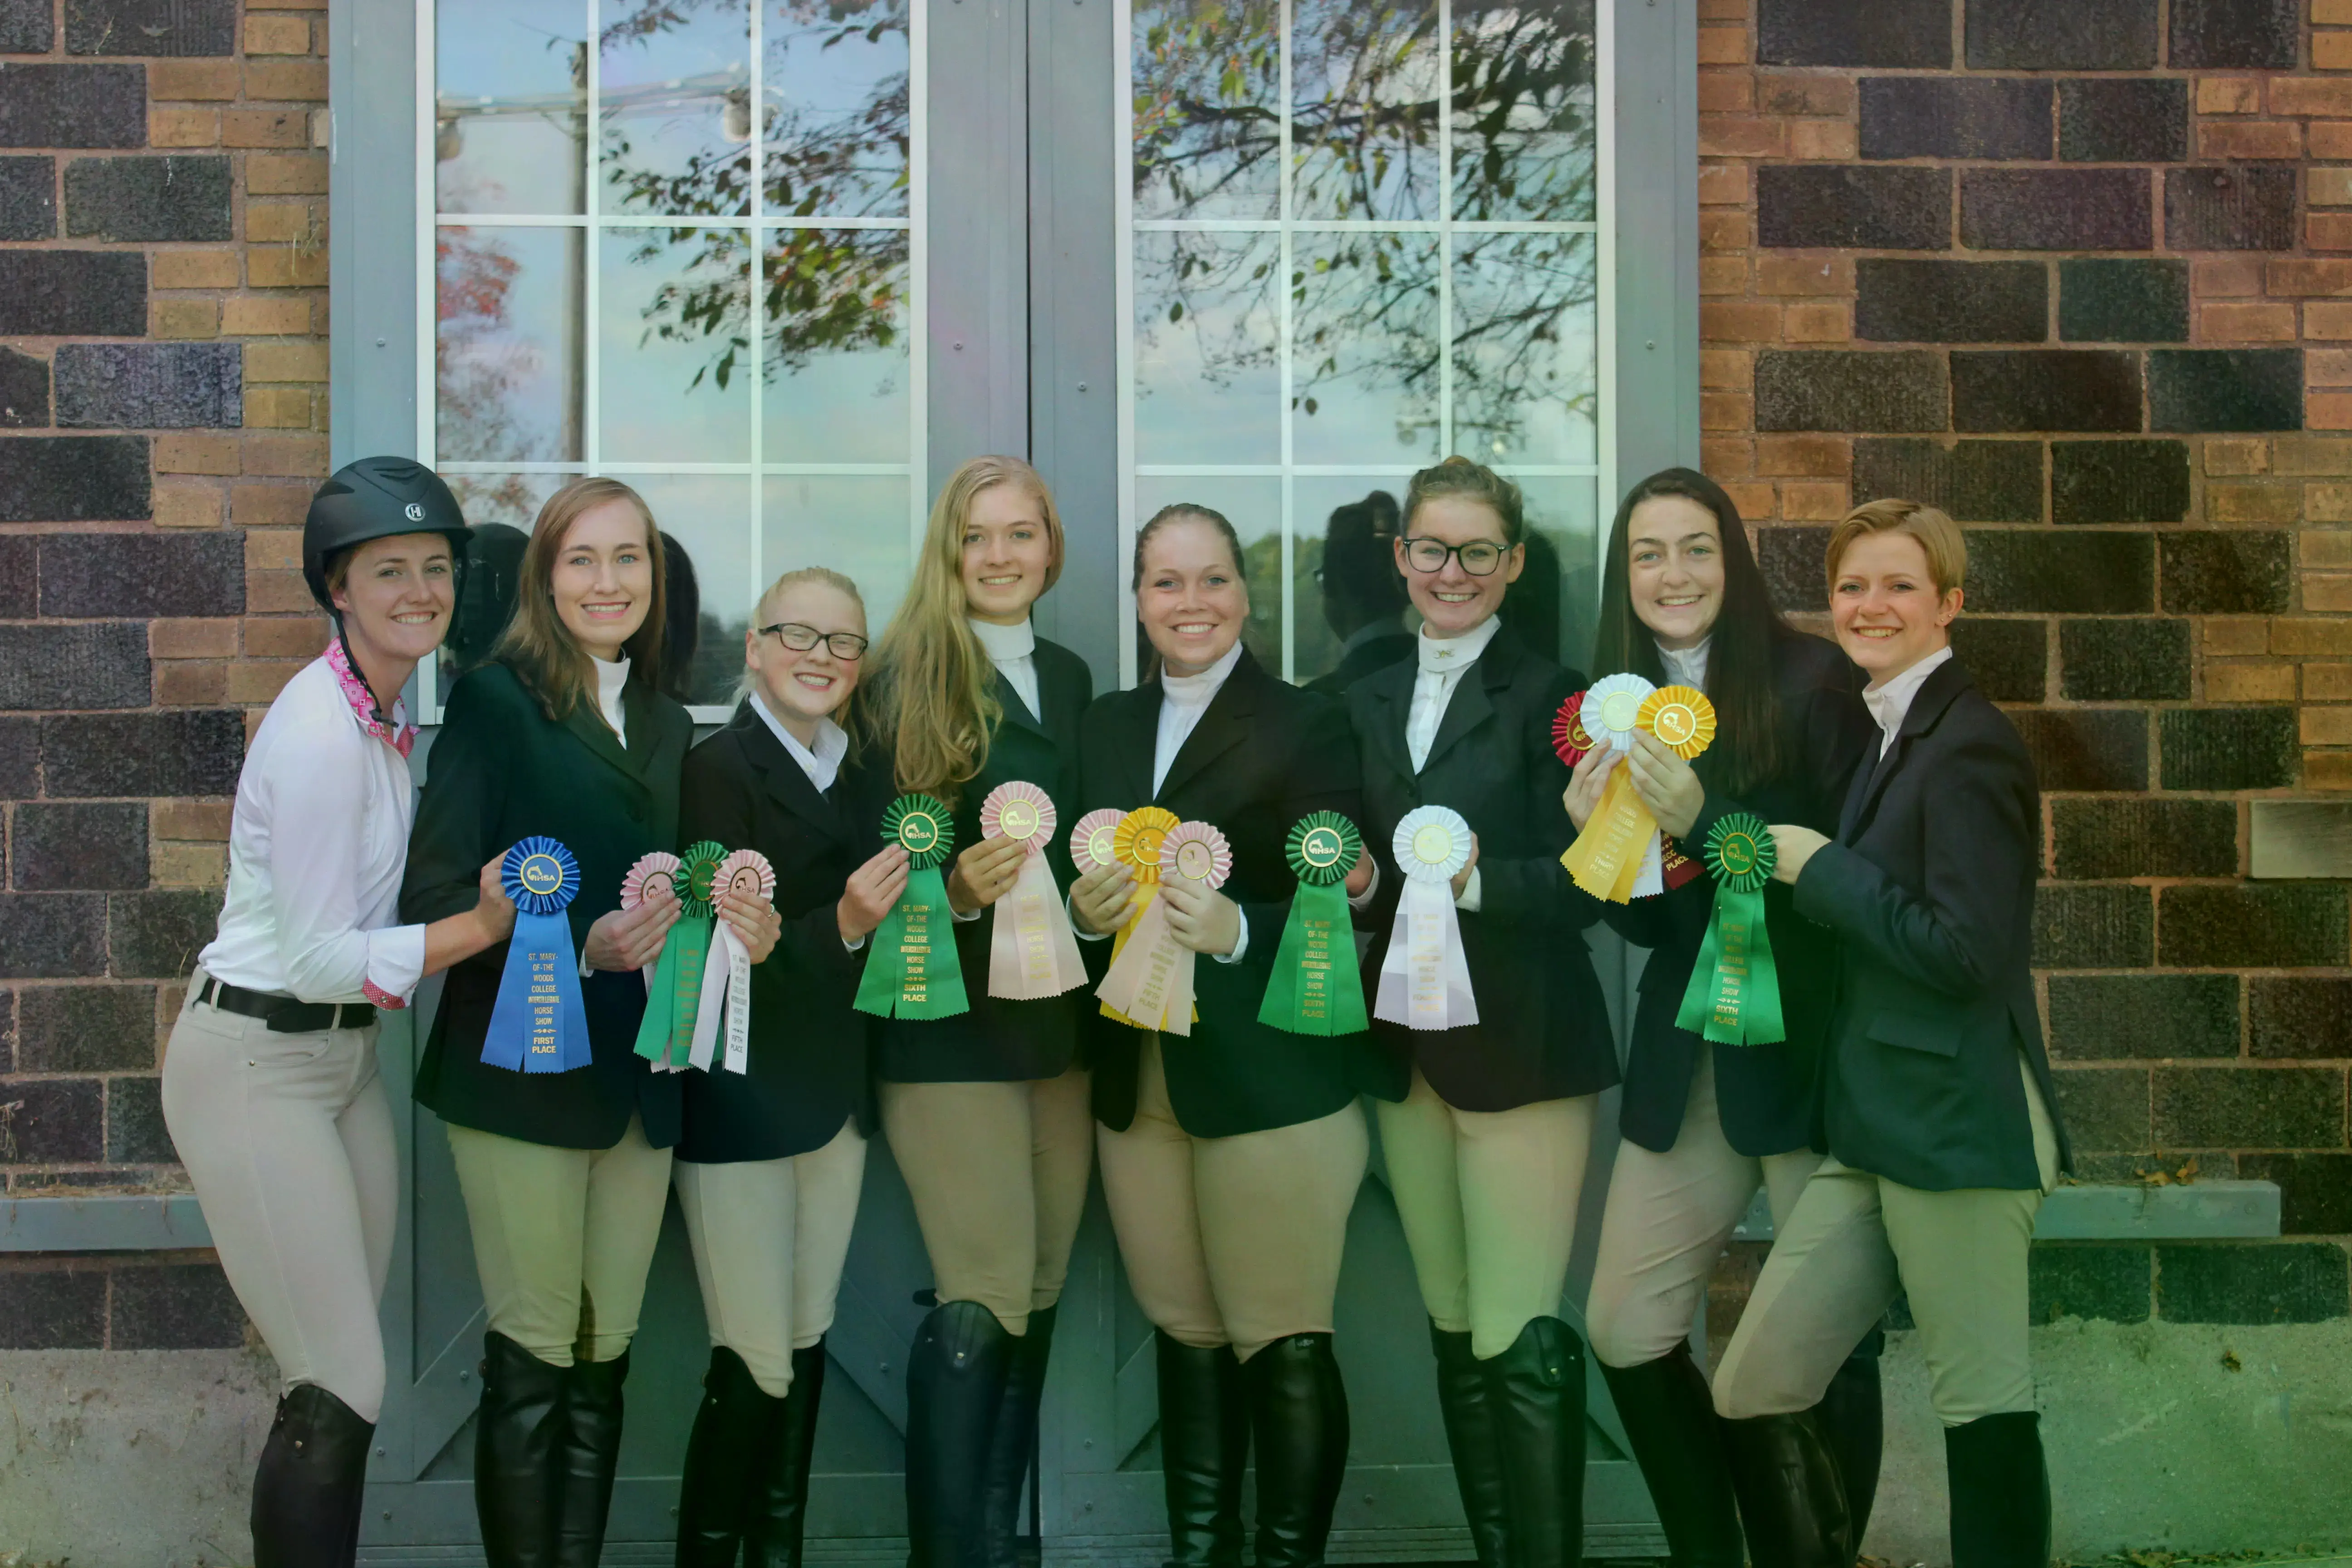 The equestrian team in front of a brick wall holding their ribbons